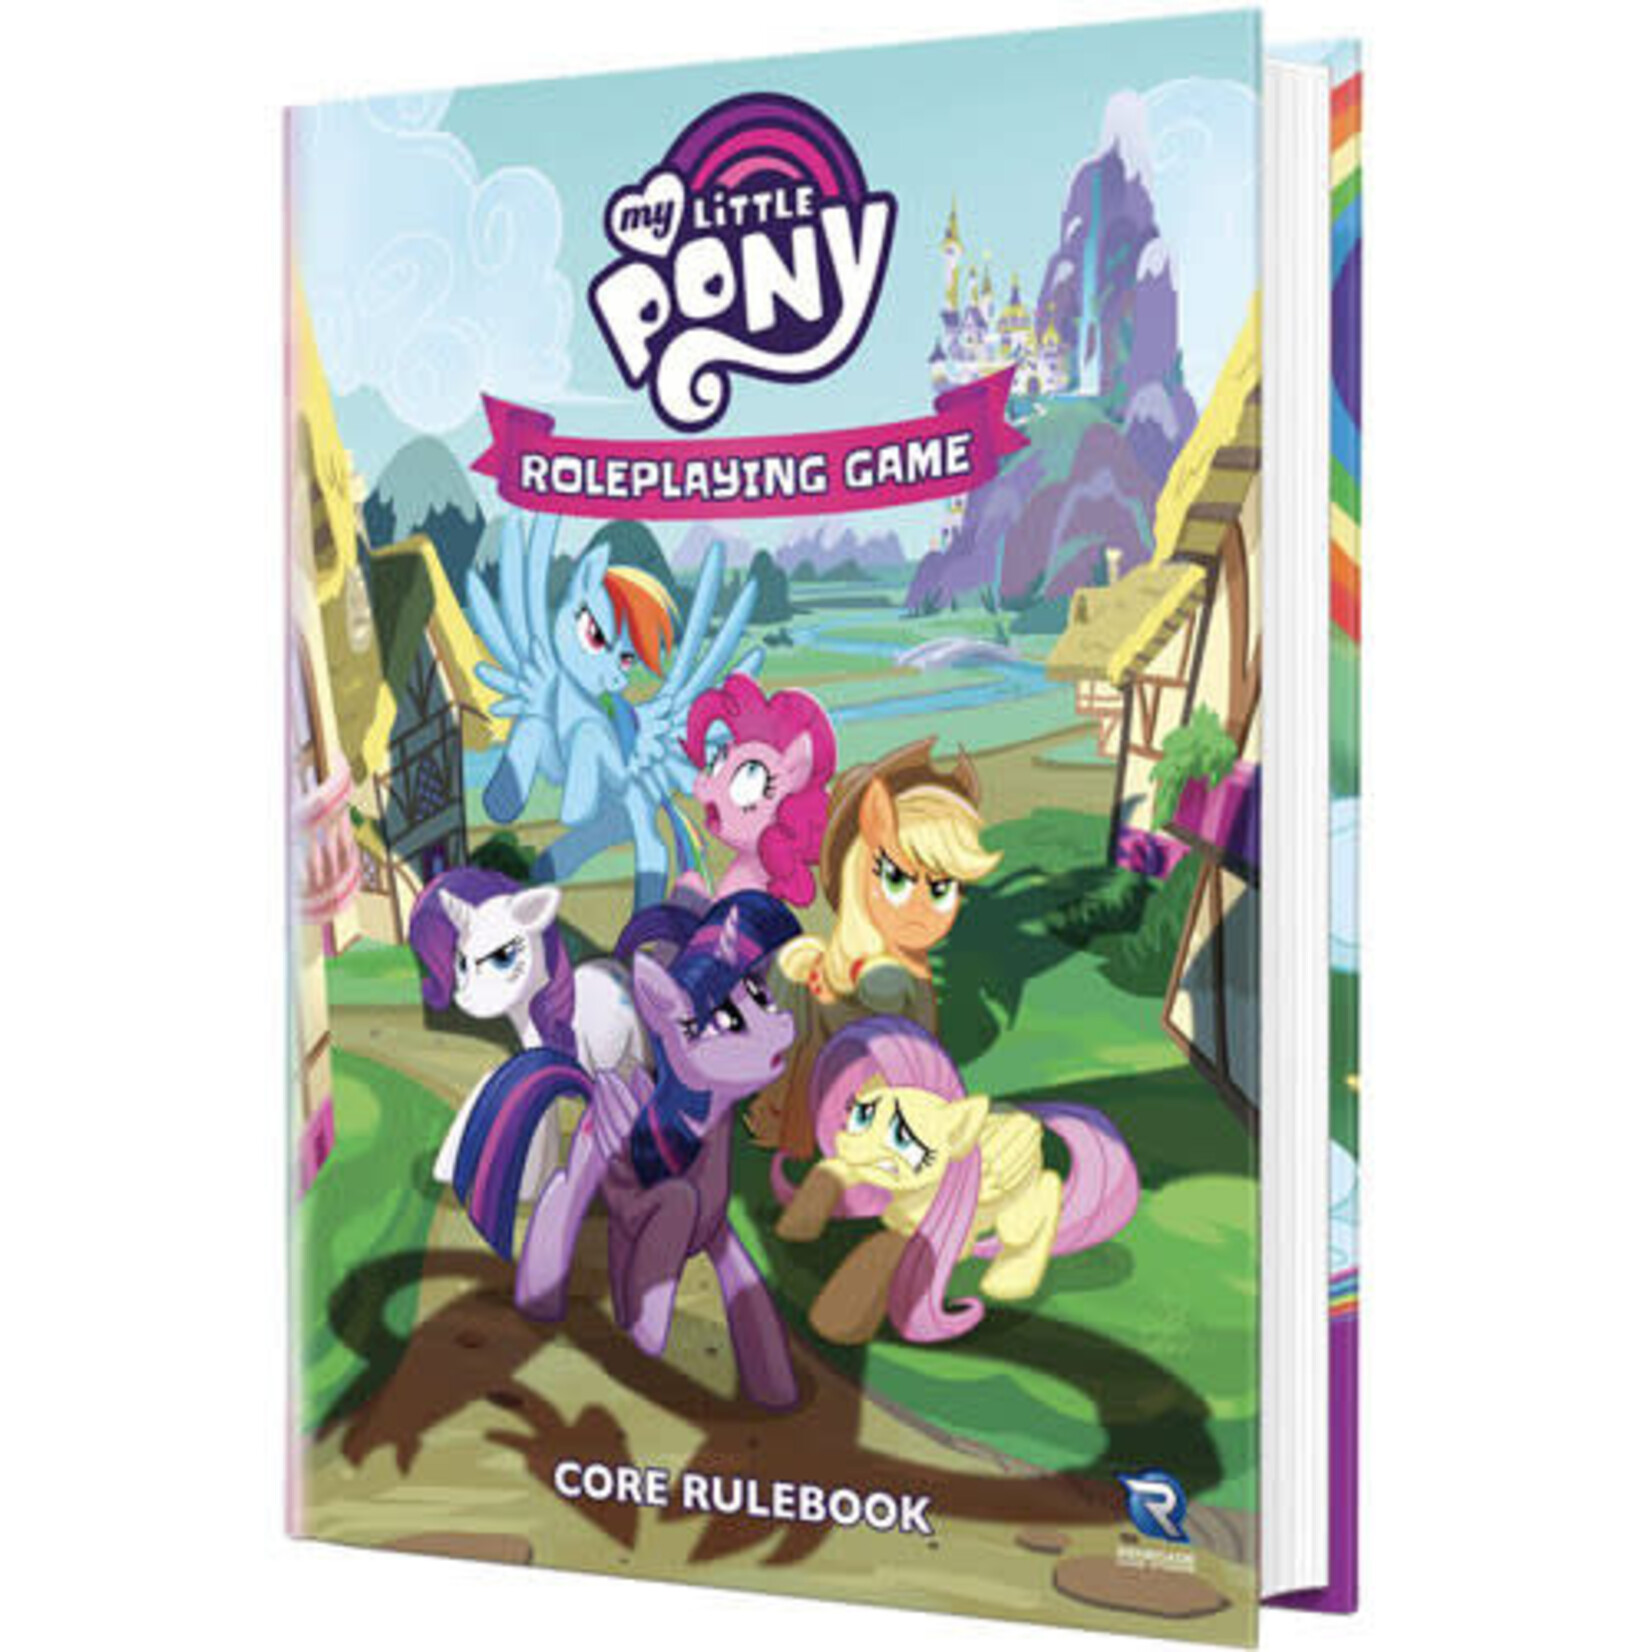 My Little Pony RPG Core Book